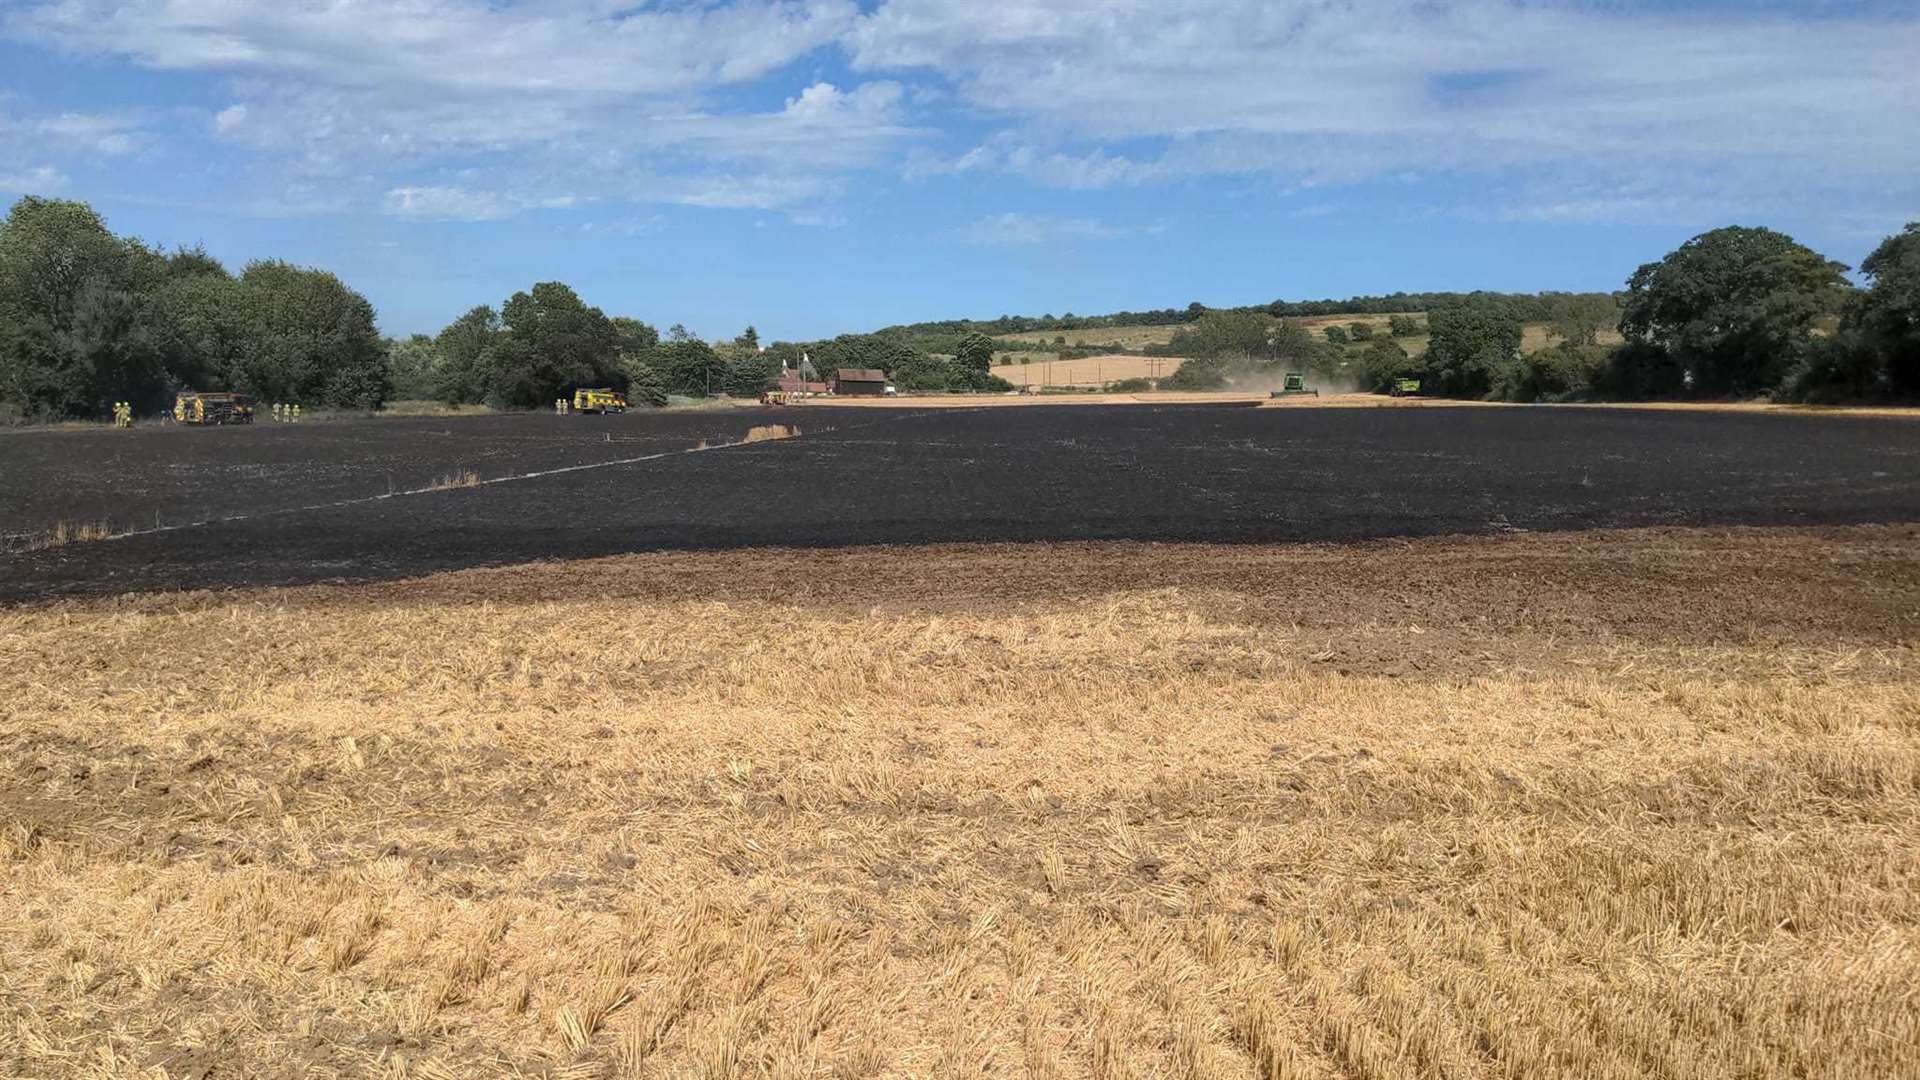 Over 20 acres of standing wheat was lost. Picture: Laura Brady